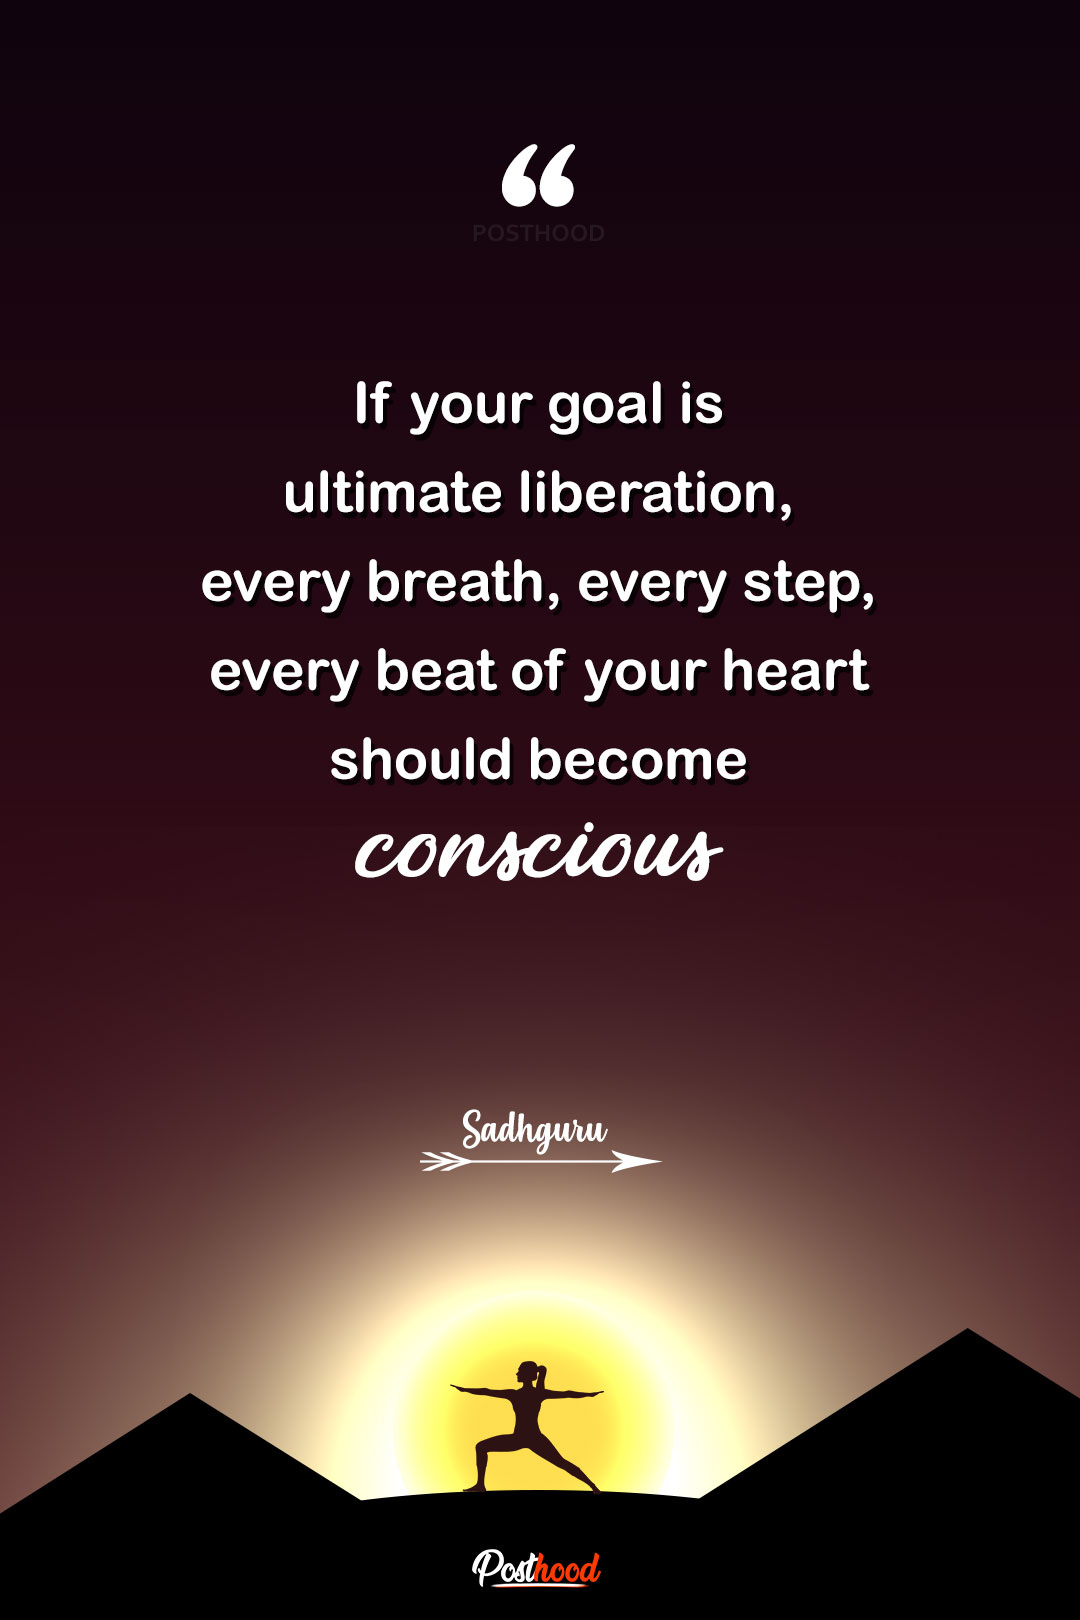 Enjoy reading these best inspirational quotes about how to live in the moment. These motivational Buddha quotes will encourage you to find ultimate liberation and peace. 